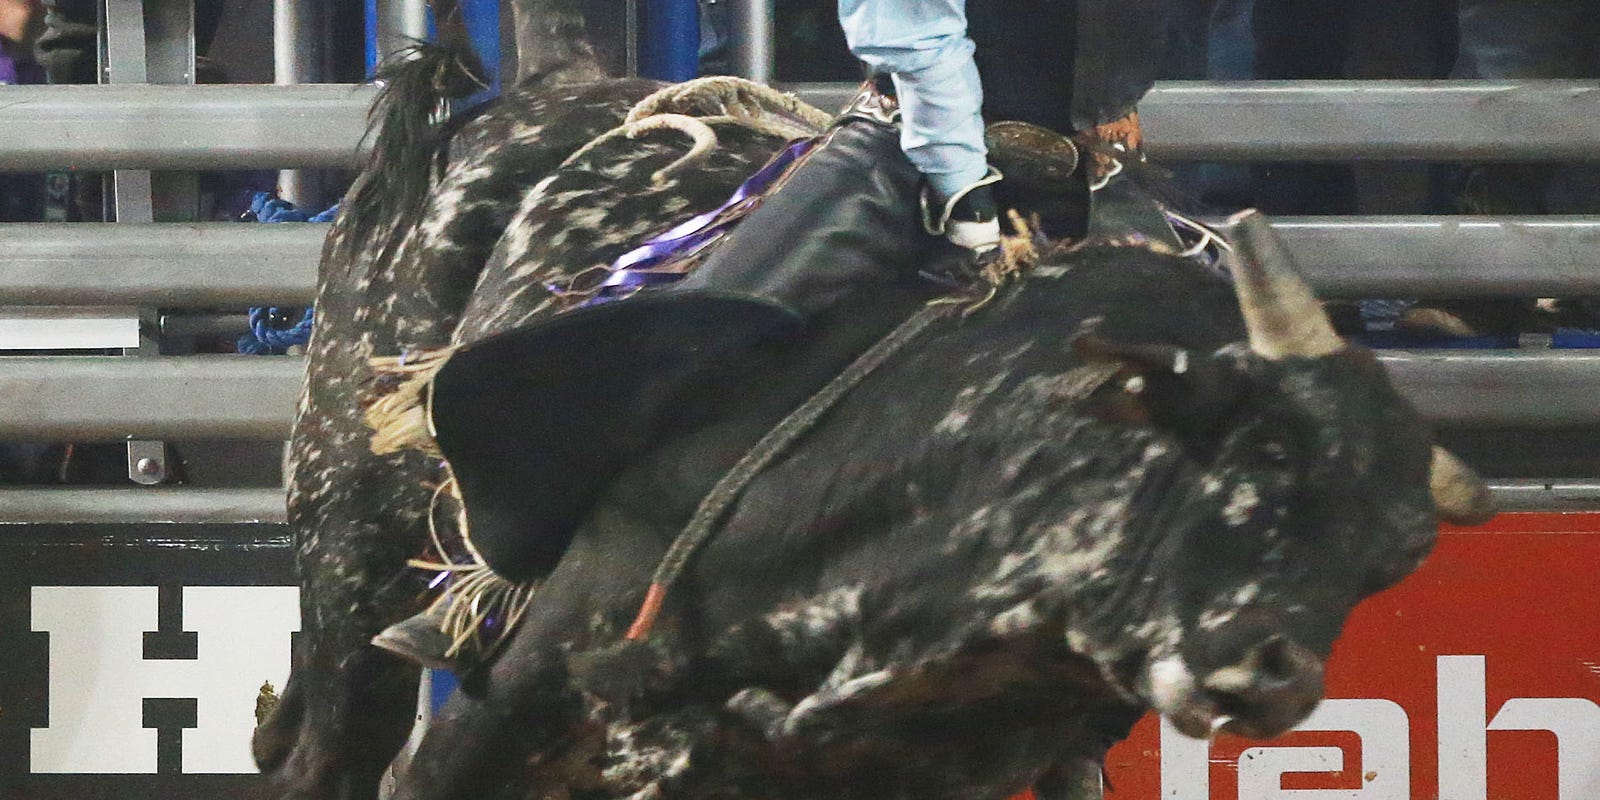 Rodeo El Paso Top cowboys compete in Tuff Hedeman Bull Riding event